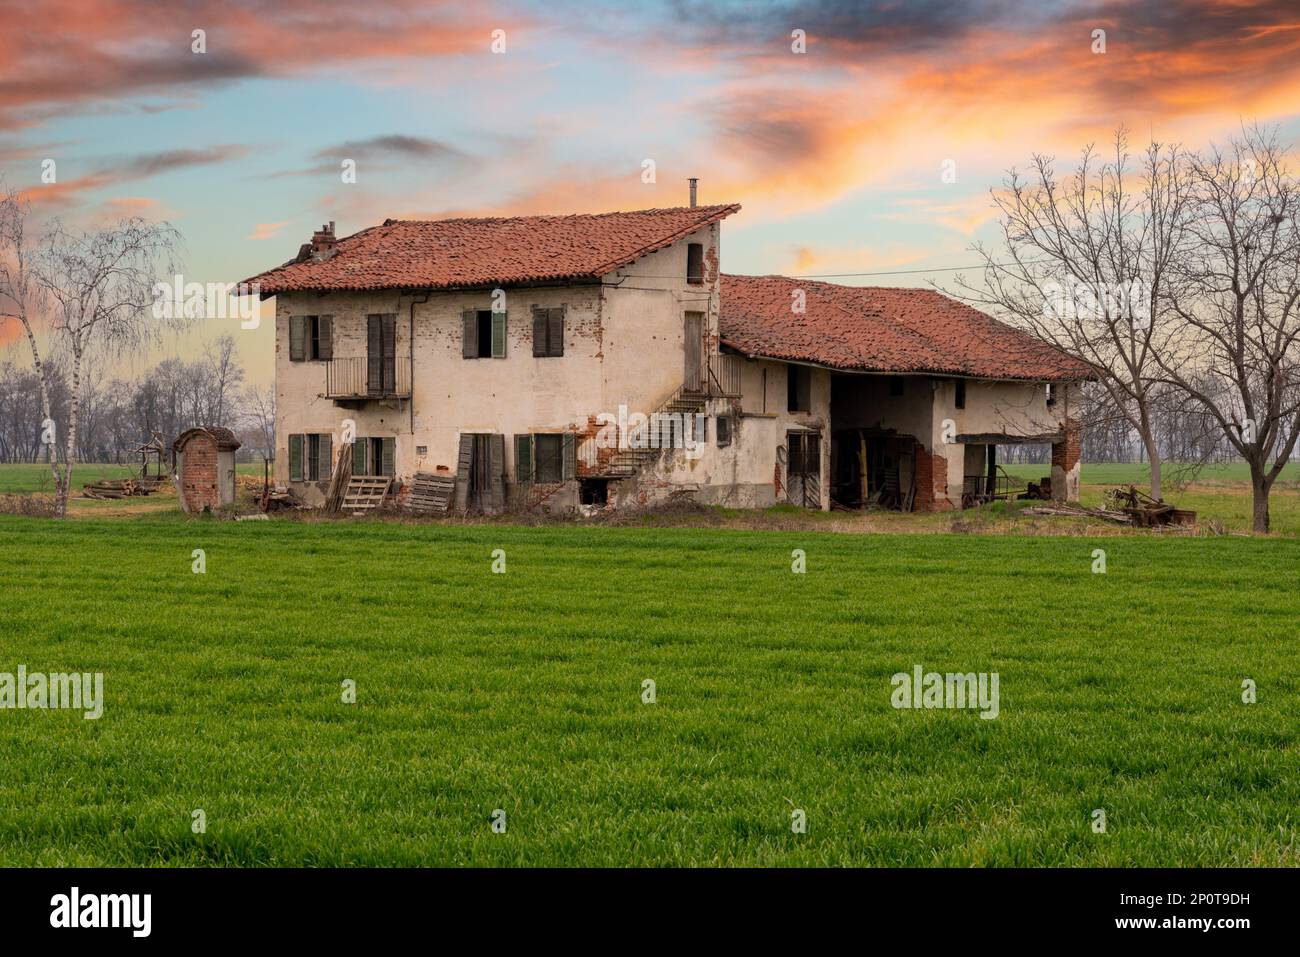 Old abandoned italian farmhouse with typical rural architecture of the Po Valley in the province of Cuneo, Italy, at sunset with field of young green Stock Photo